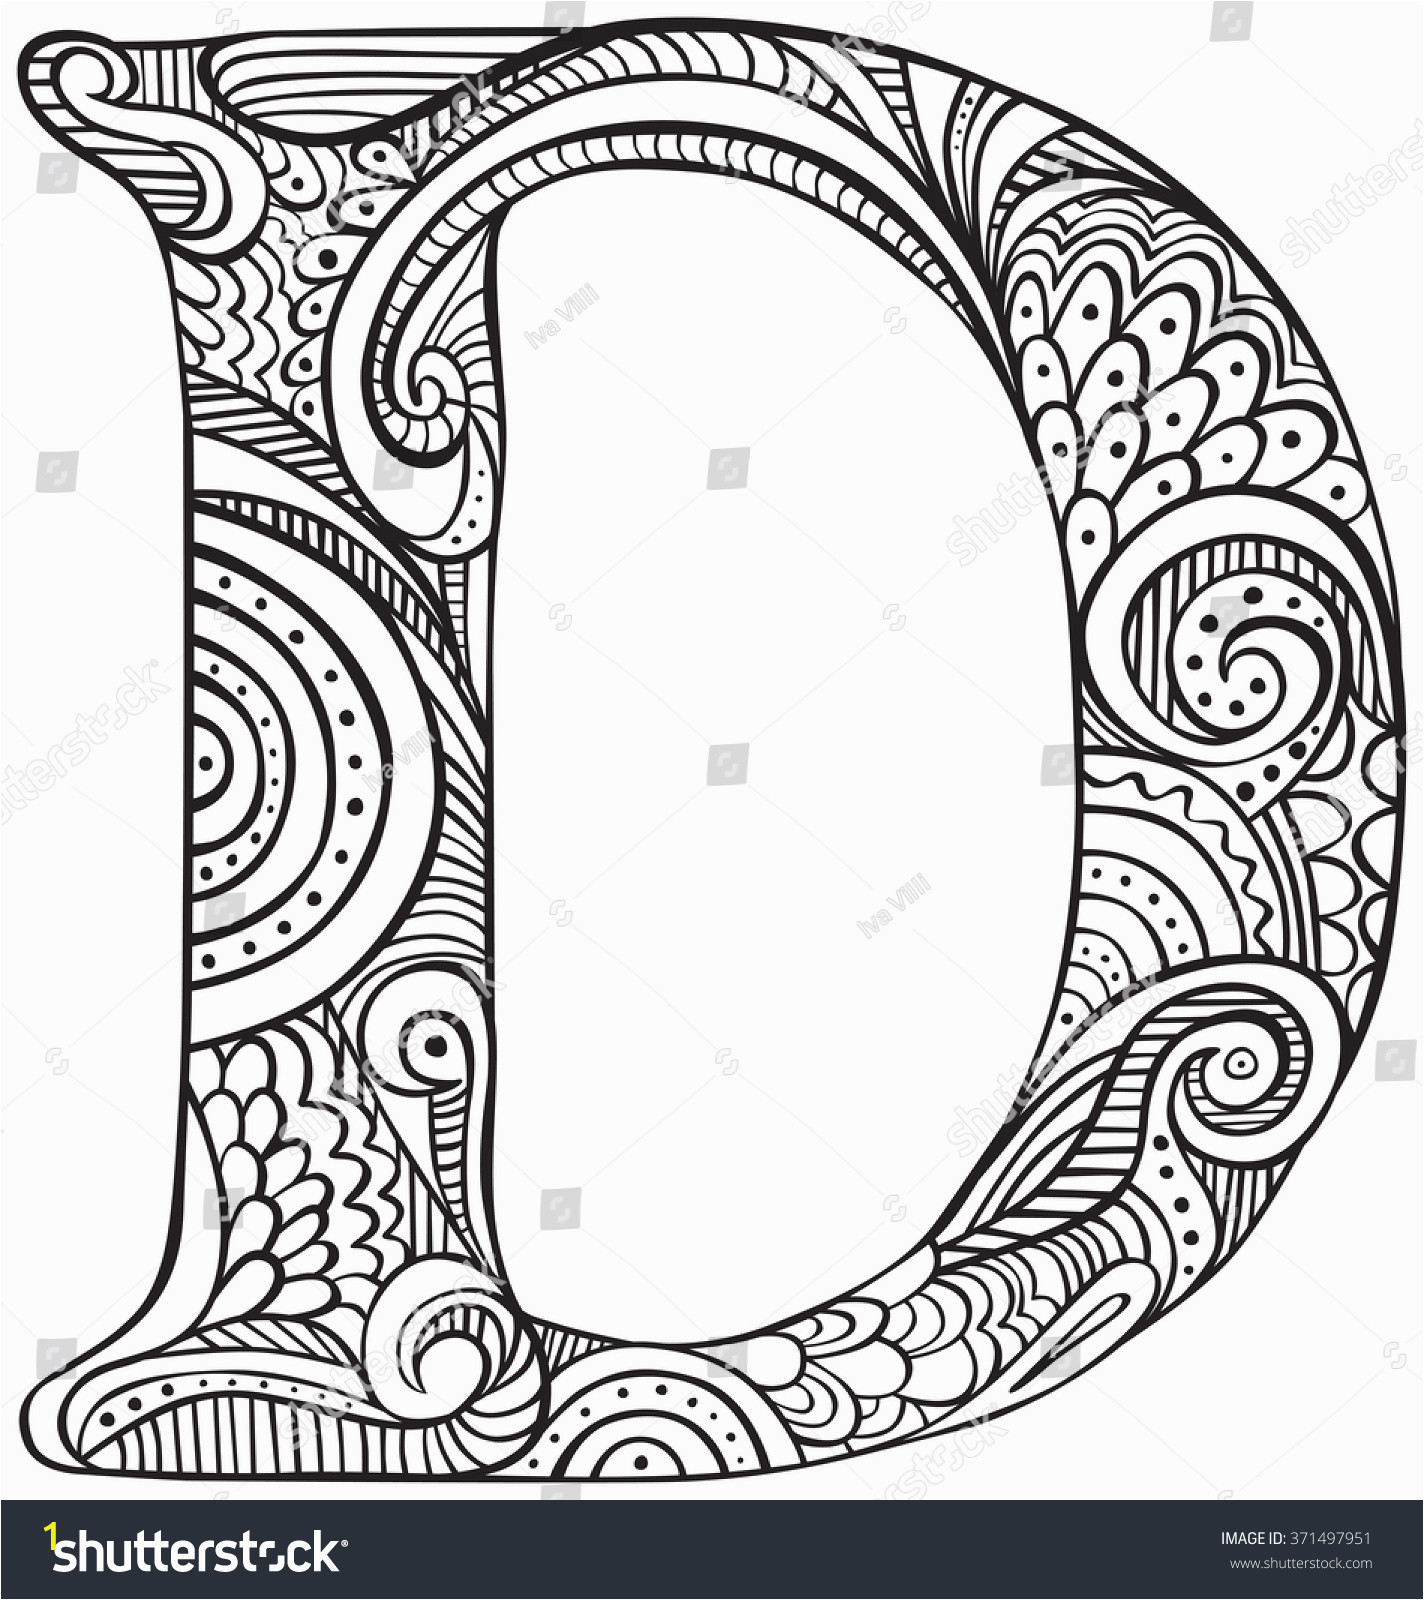 stock vector hand drawn capital letter d in black coloring sheet for adults